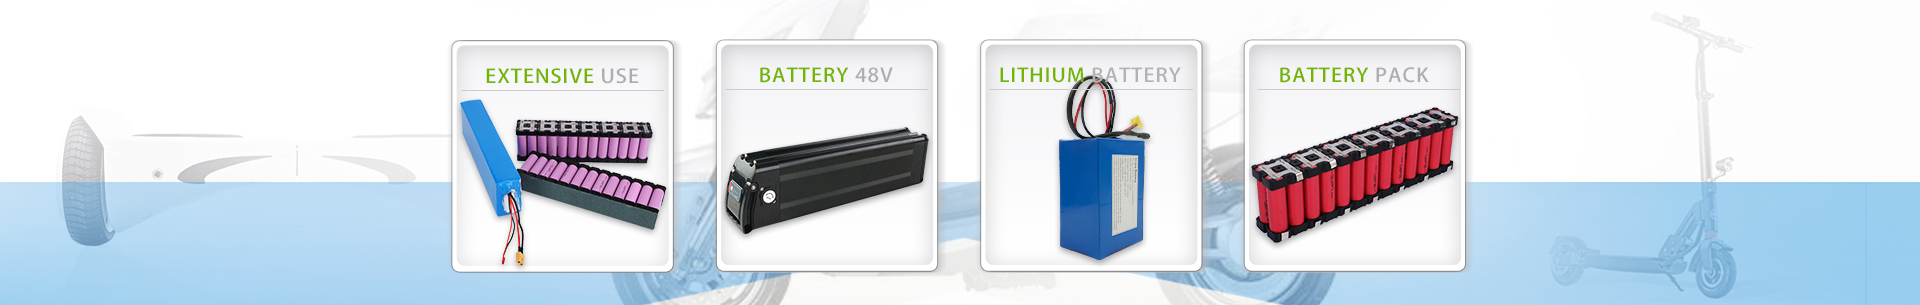 What causes lithium batteries to swell?